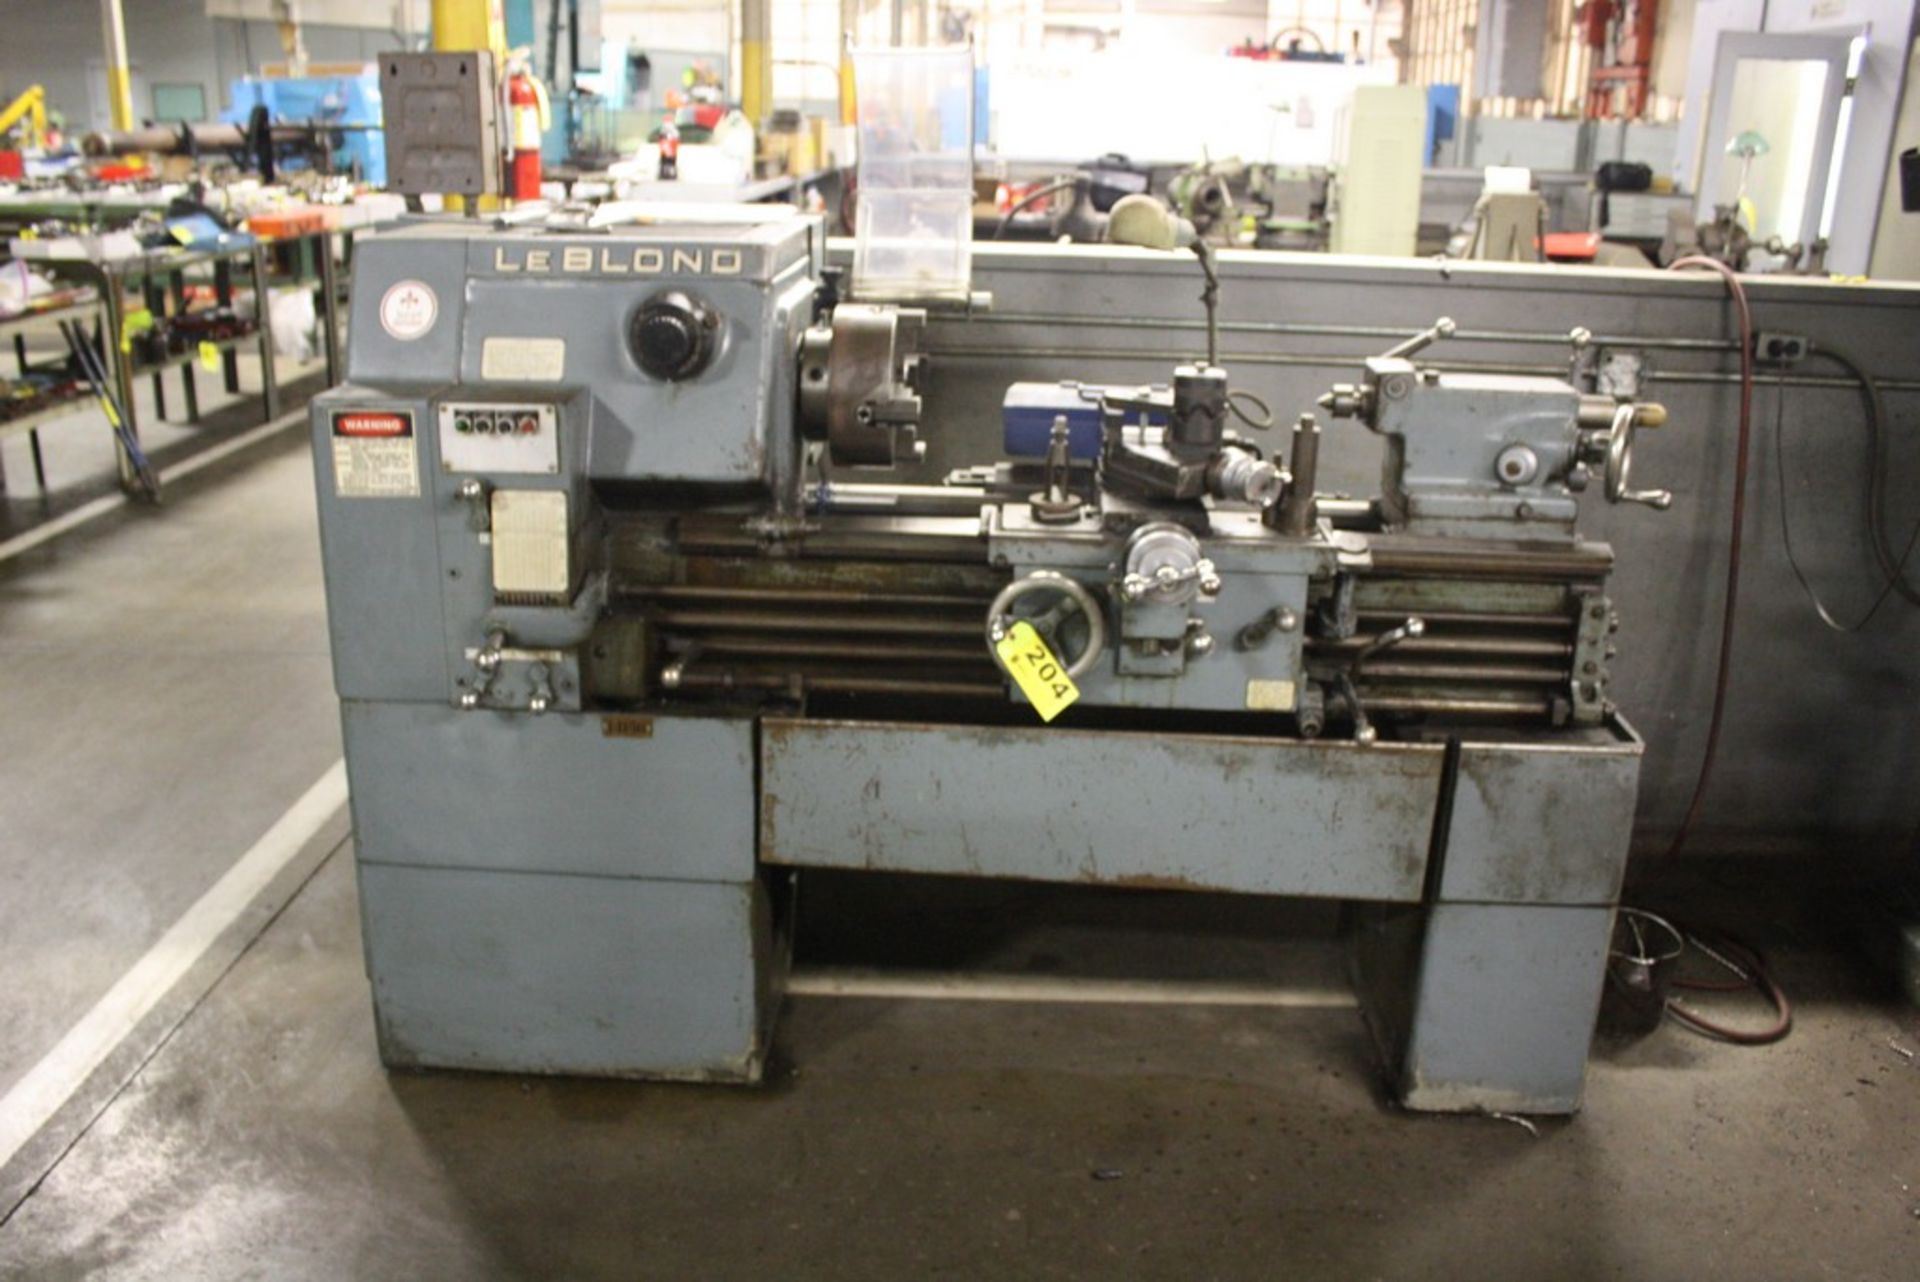 LEBLOND 15" X36" MODEL TOOL & DIE MAKERS LATHE, S/N 6HC-277, 10" 4-JAW CHUCK, 2400 RPM SPINDLE,